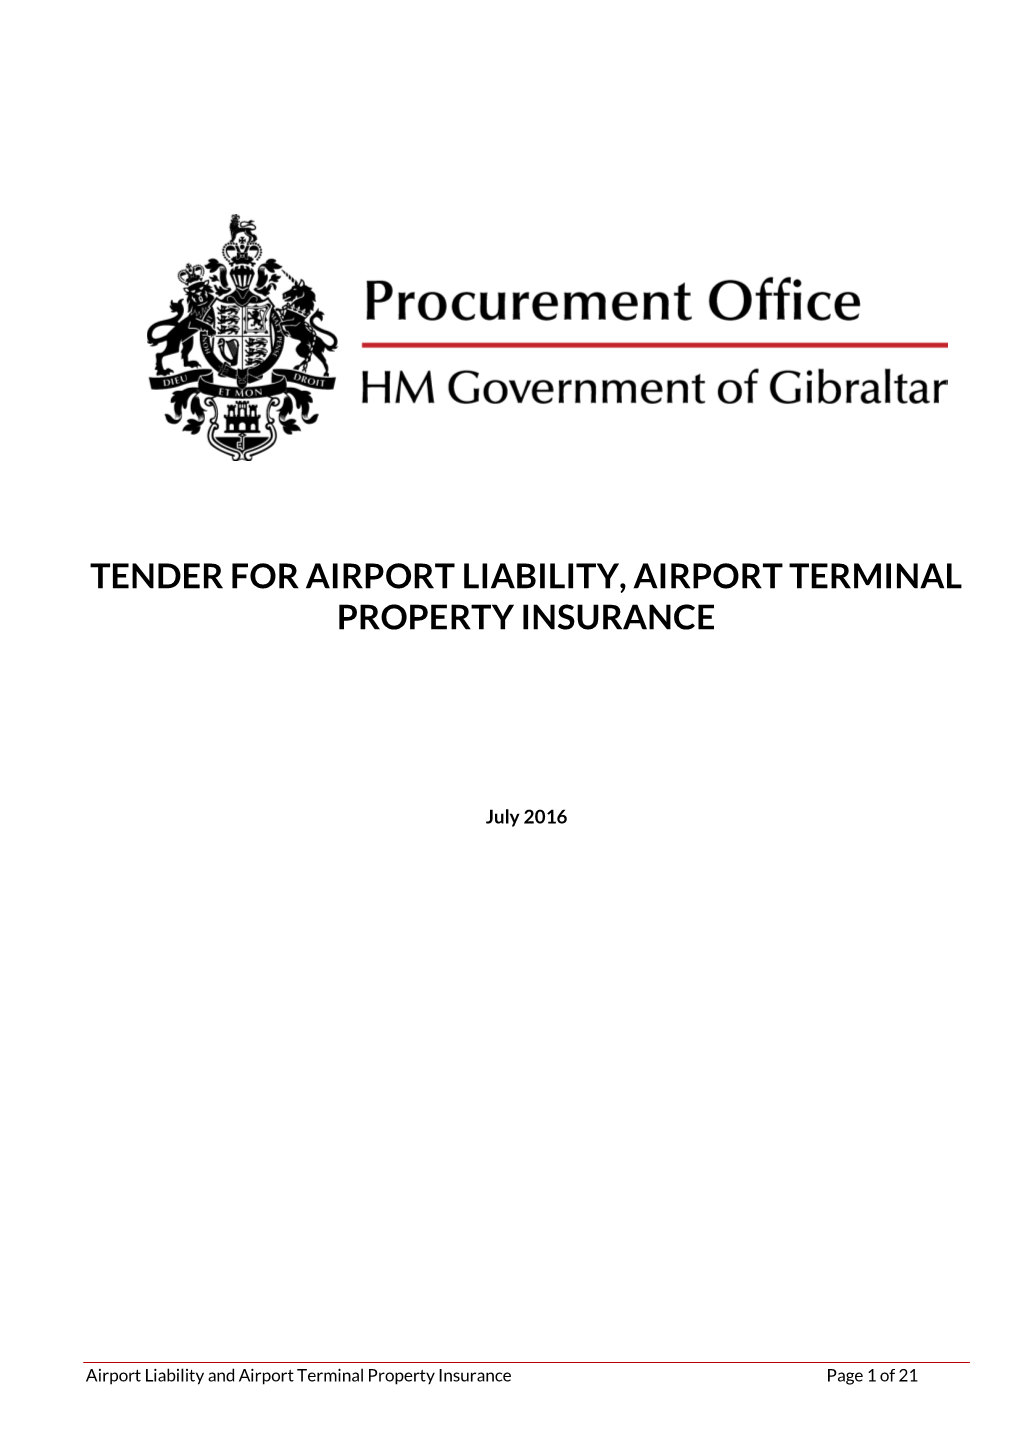 Tender for Airport Liability, Airport Terminal Property Insurance